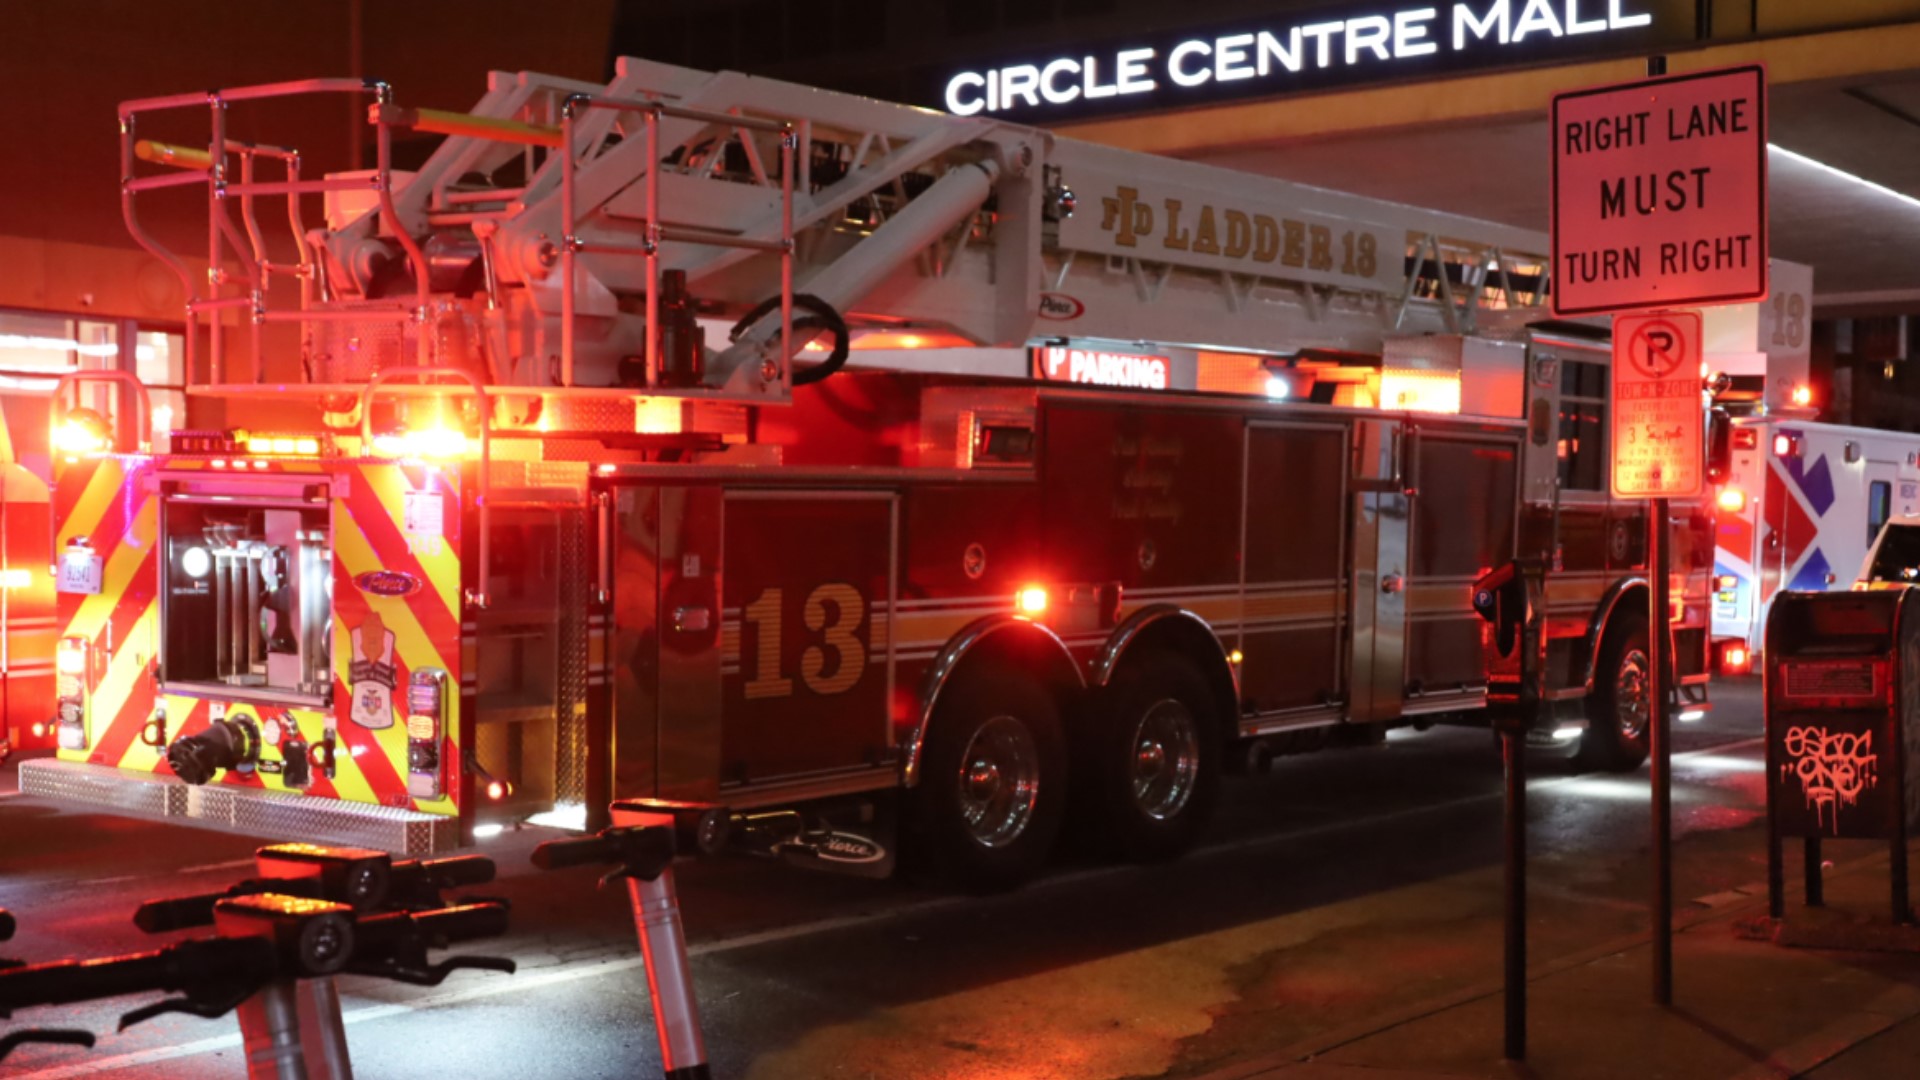 It happened early Friday evening when the car became stuck between floors at Circle Centre.